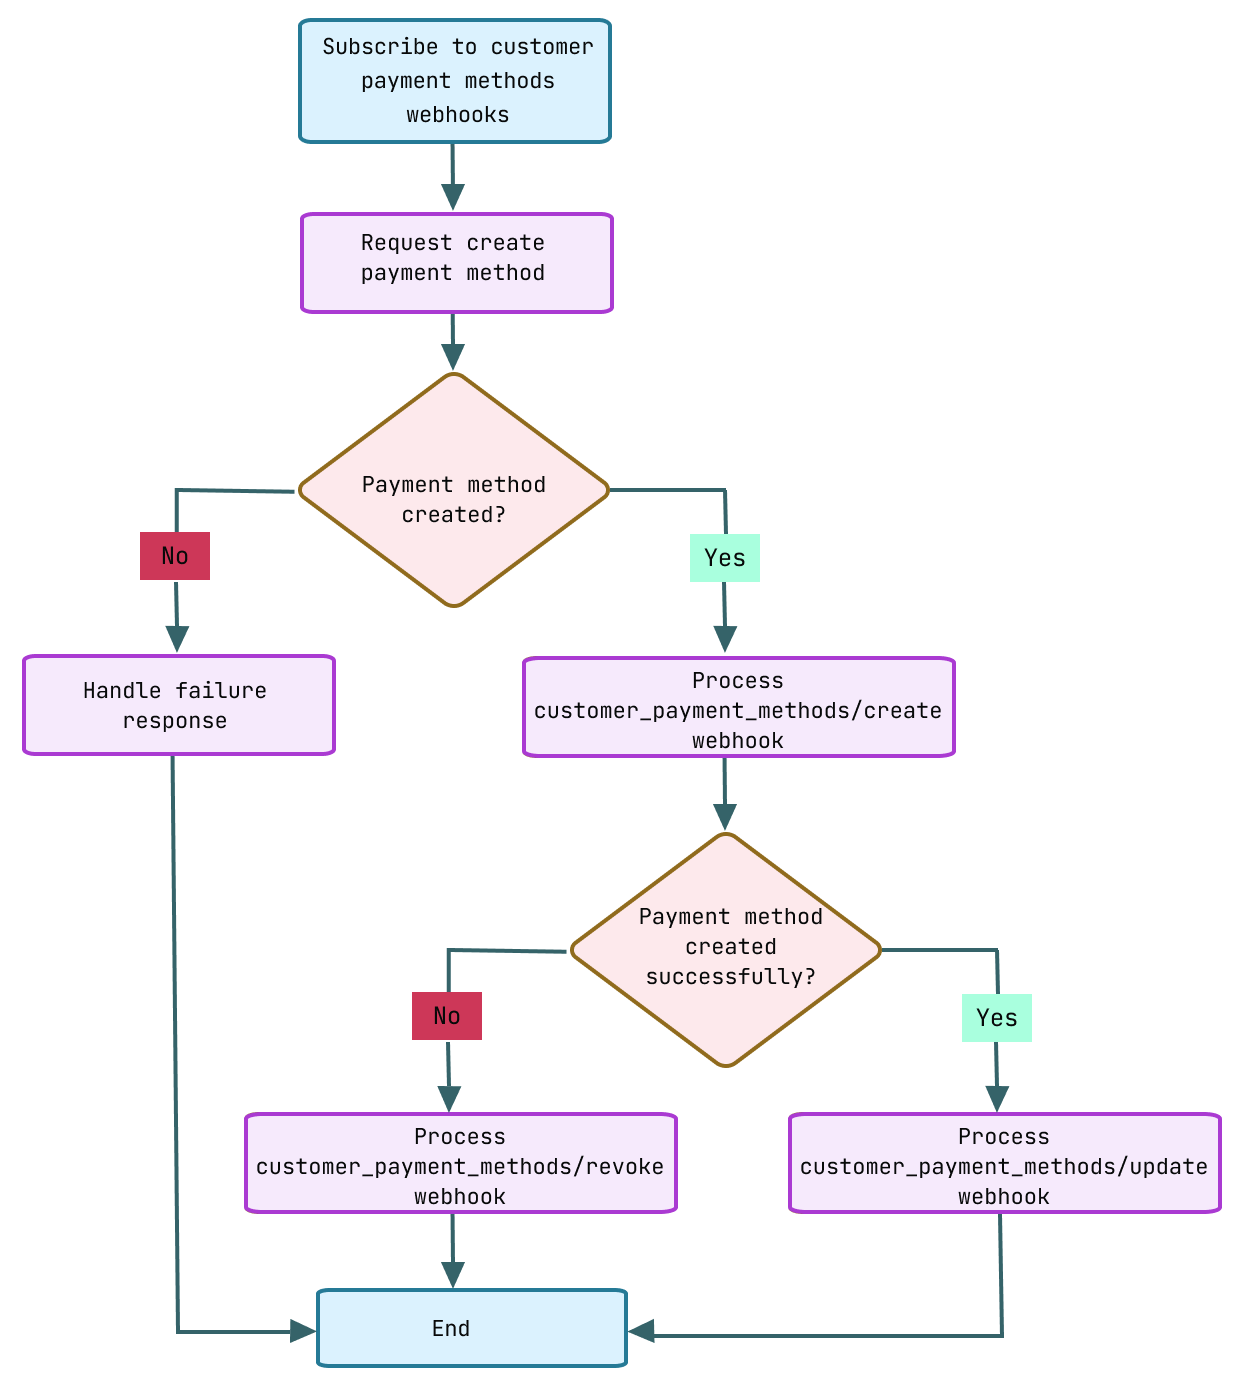 A flowchart illustrating the general workflow for creating new payment methods. The flow begins with a subscription to customer payment methods webhooks and making a request to the create payment method endpoint. If the payment method is not created, then a failure response is handled. If the payment method is created, then Shopify processes the customer_payment_methods/create webhook. If successful, then Shopify processes the customer_payment_methods/update webhook. If unsuccessful, then Shopify processes the customer_payment_methods/revoke webhook